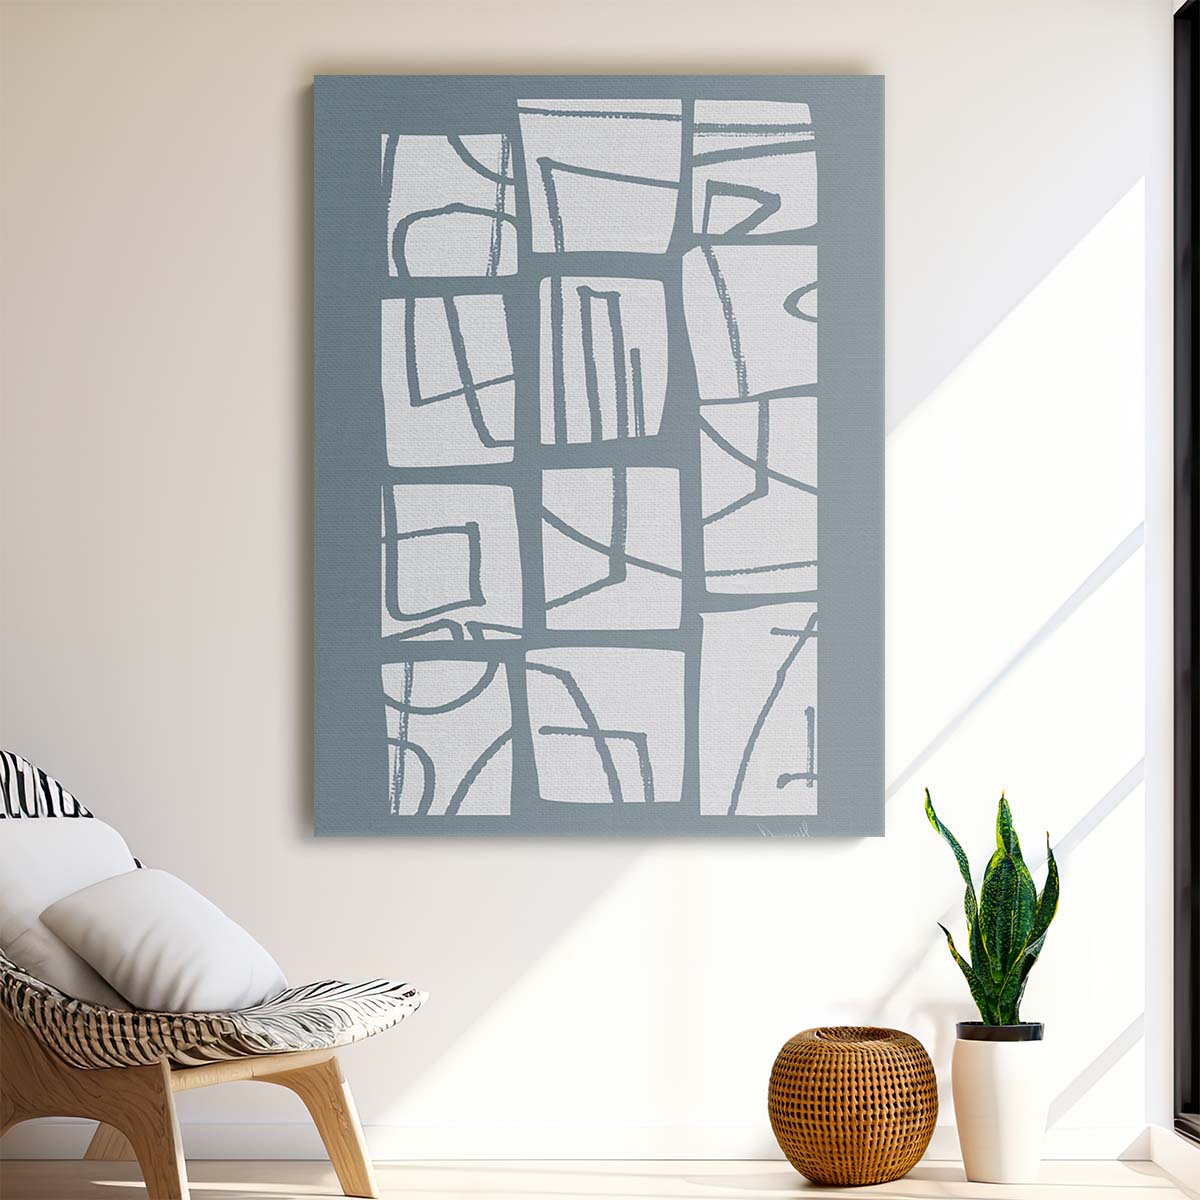 Dan Hobday's Minimalistic Abstract Geometric Illustration - Contemporary Painted Shapes by Luxuriance Designs, made in USA